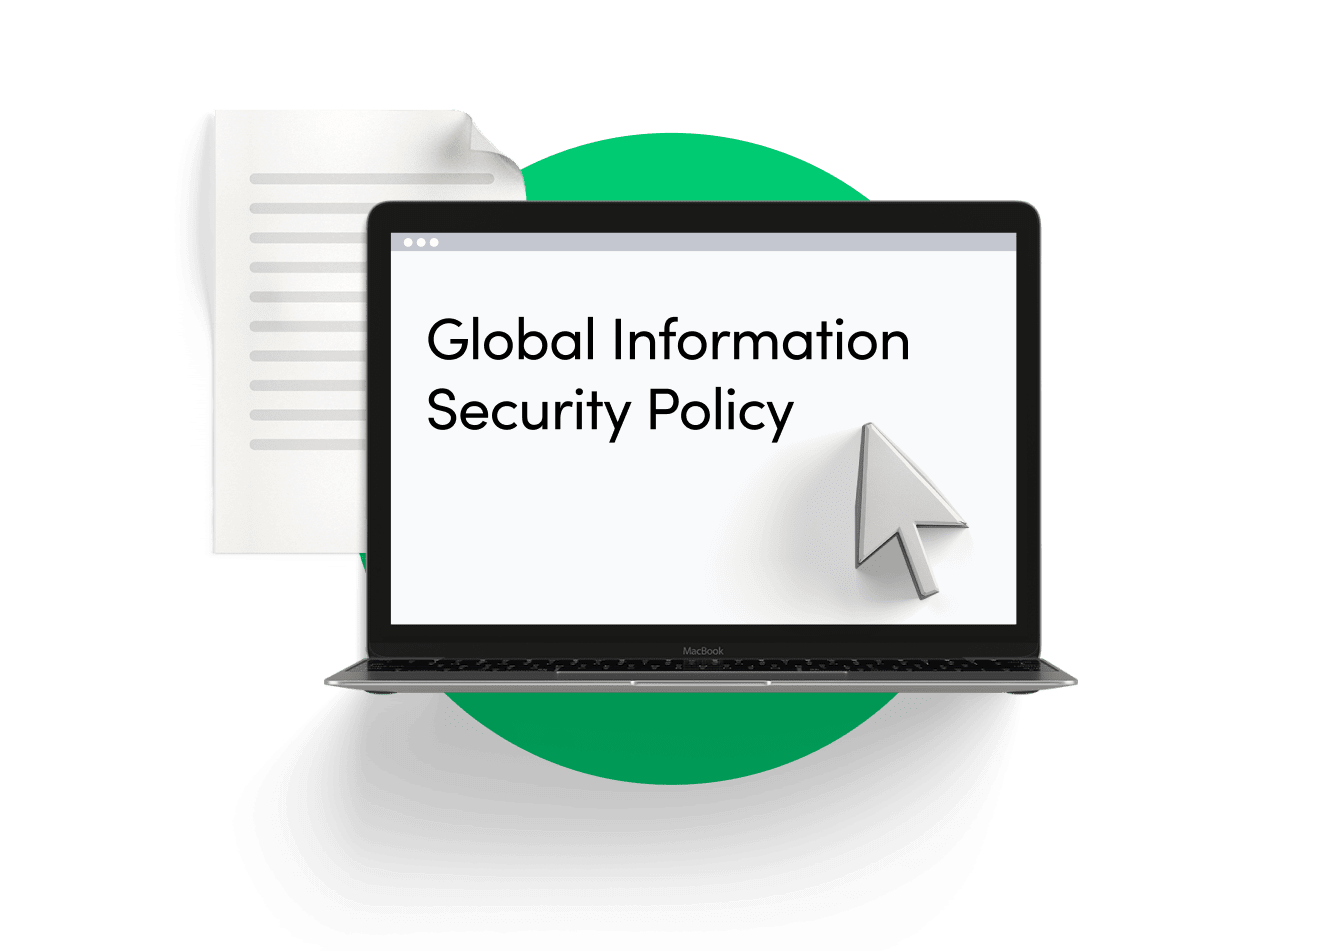 GlobalInformationSecurity